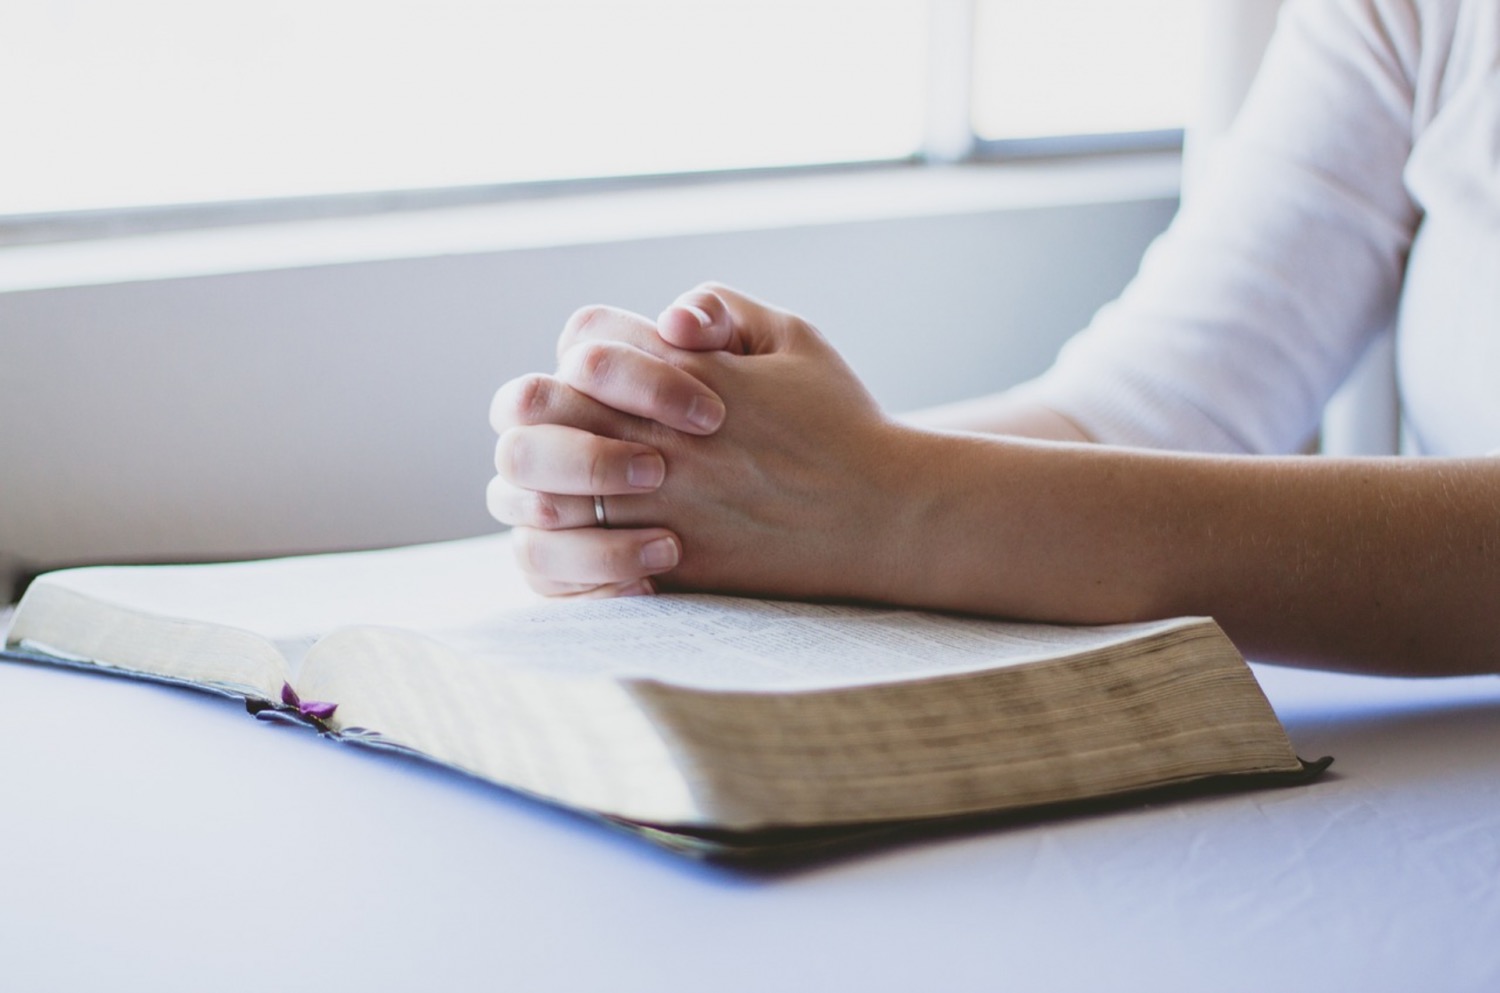 Woman praying, with her hands rested on the Bible